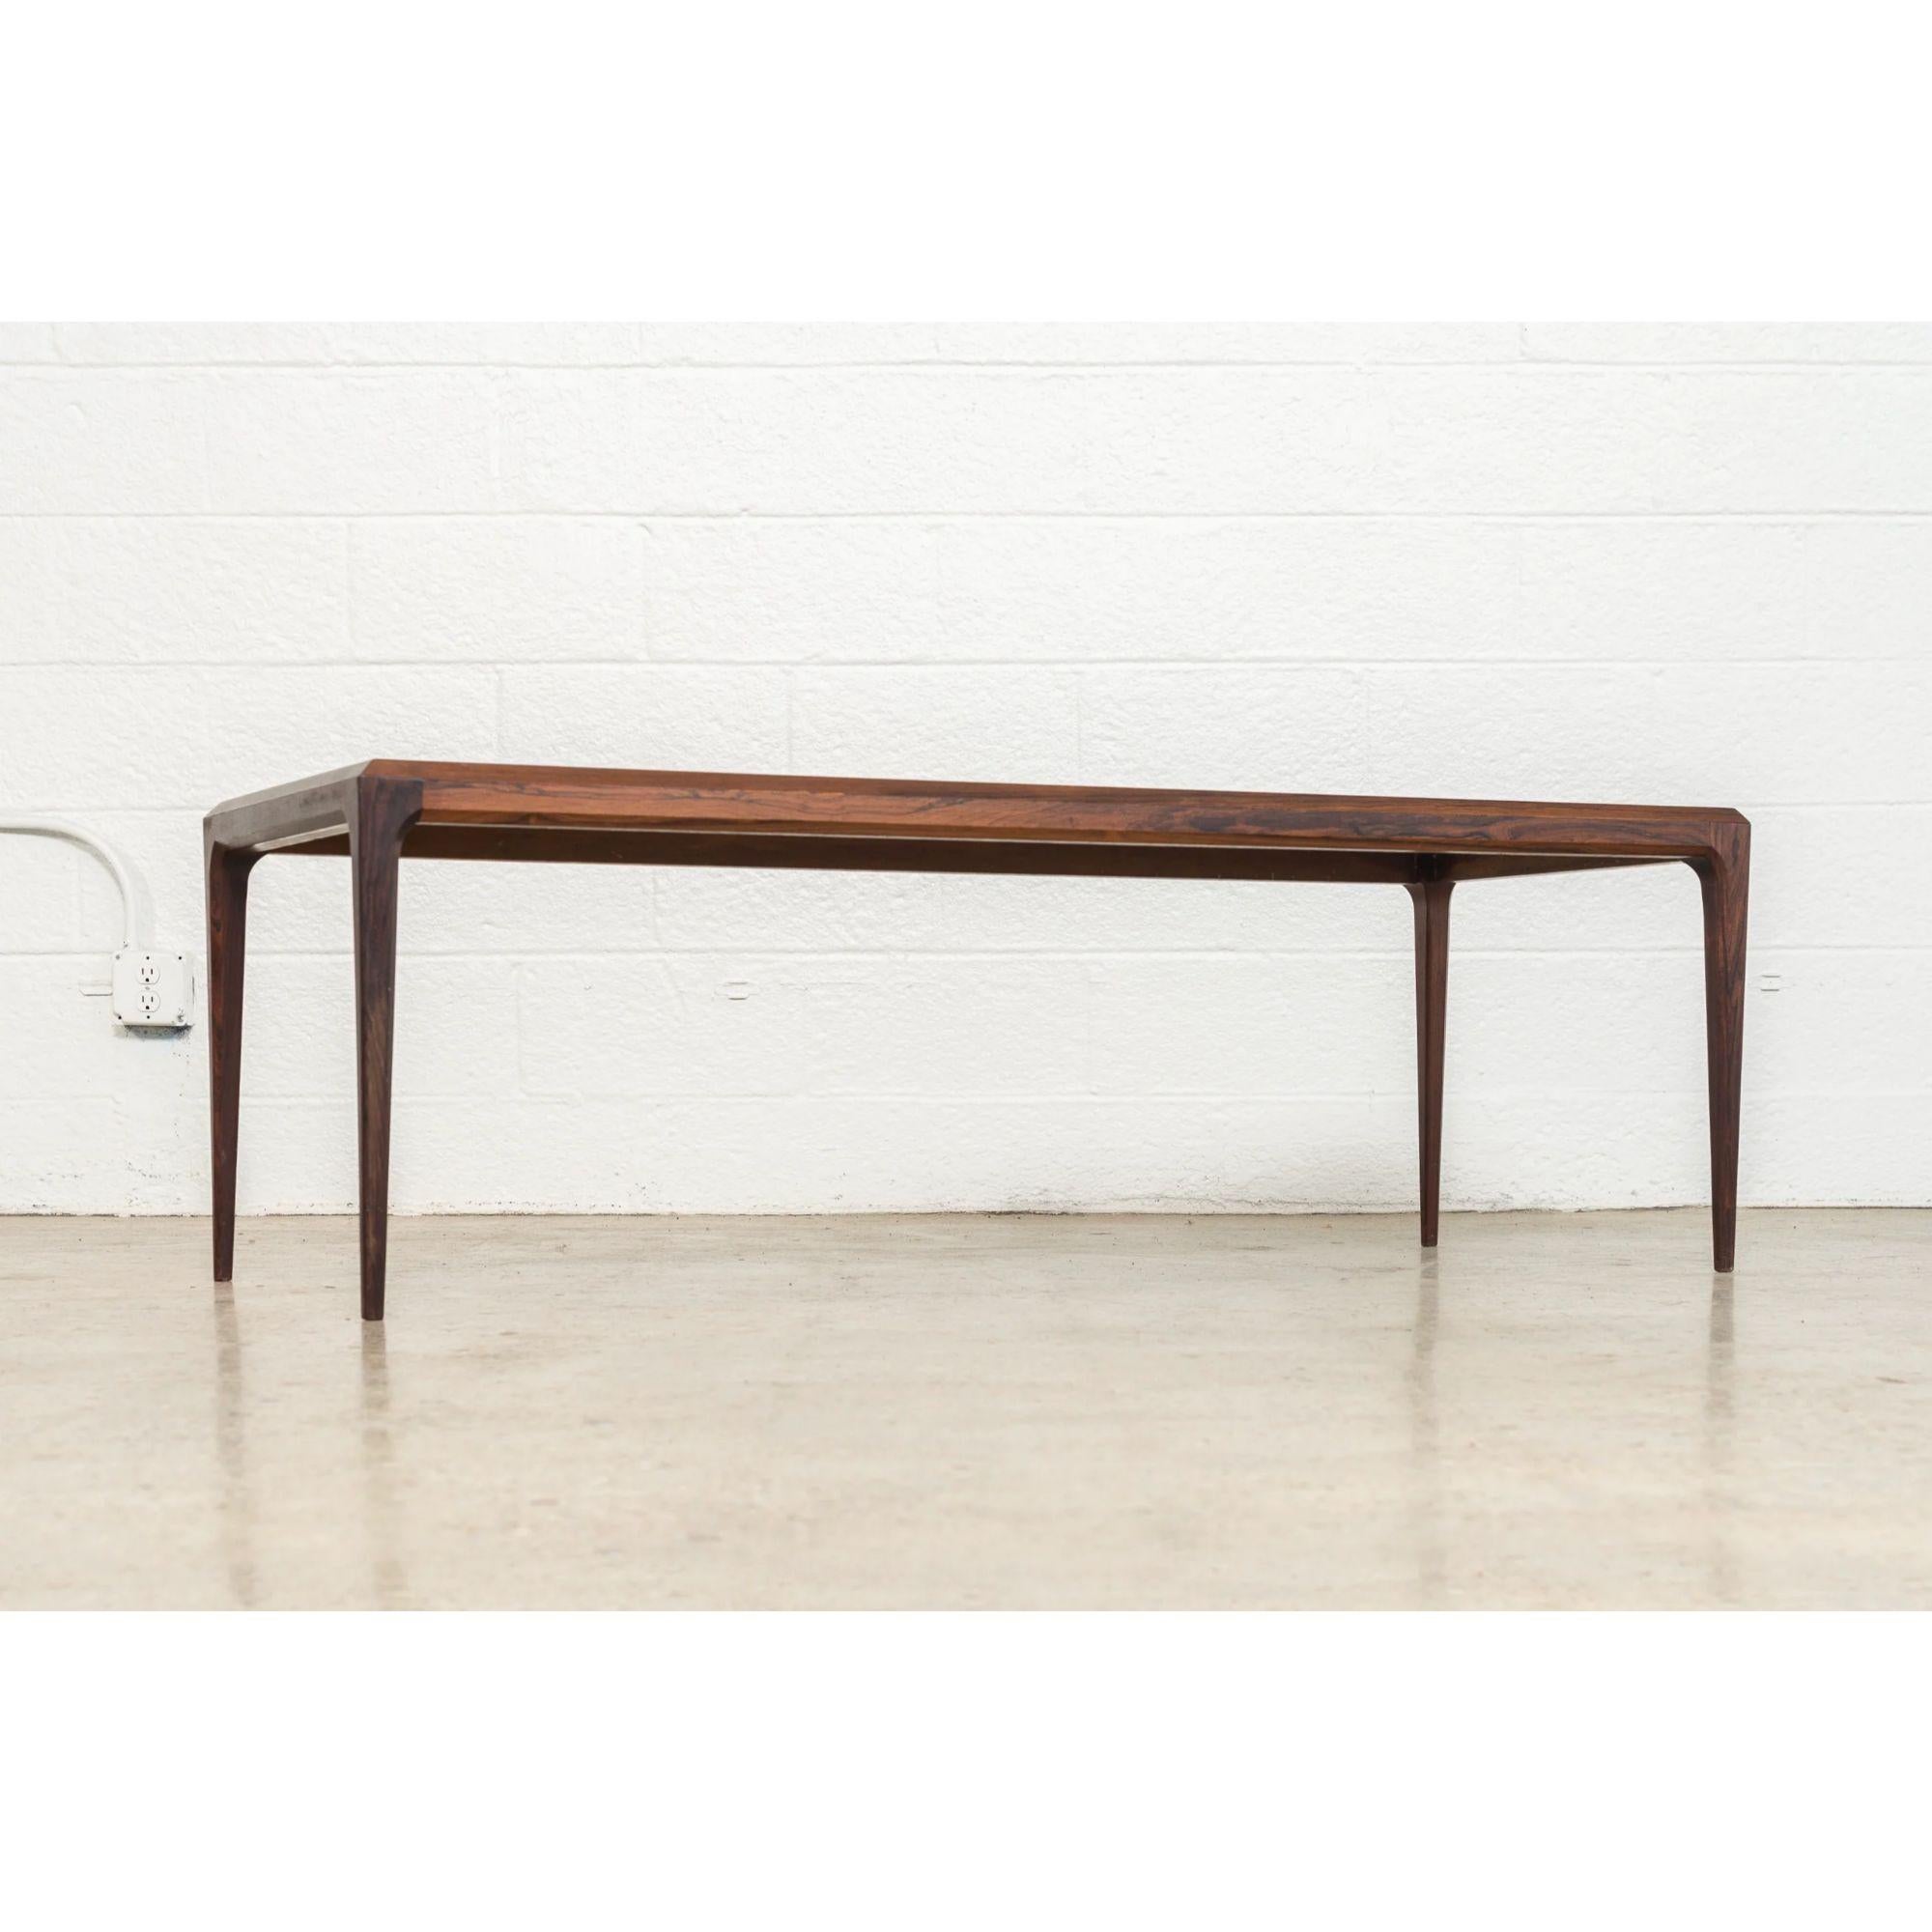 Danish Modern Coffee Table in Rosewood by Johannes Andersen, 1960s For Sale 1